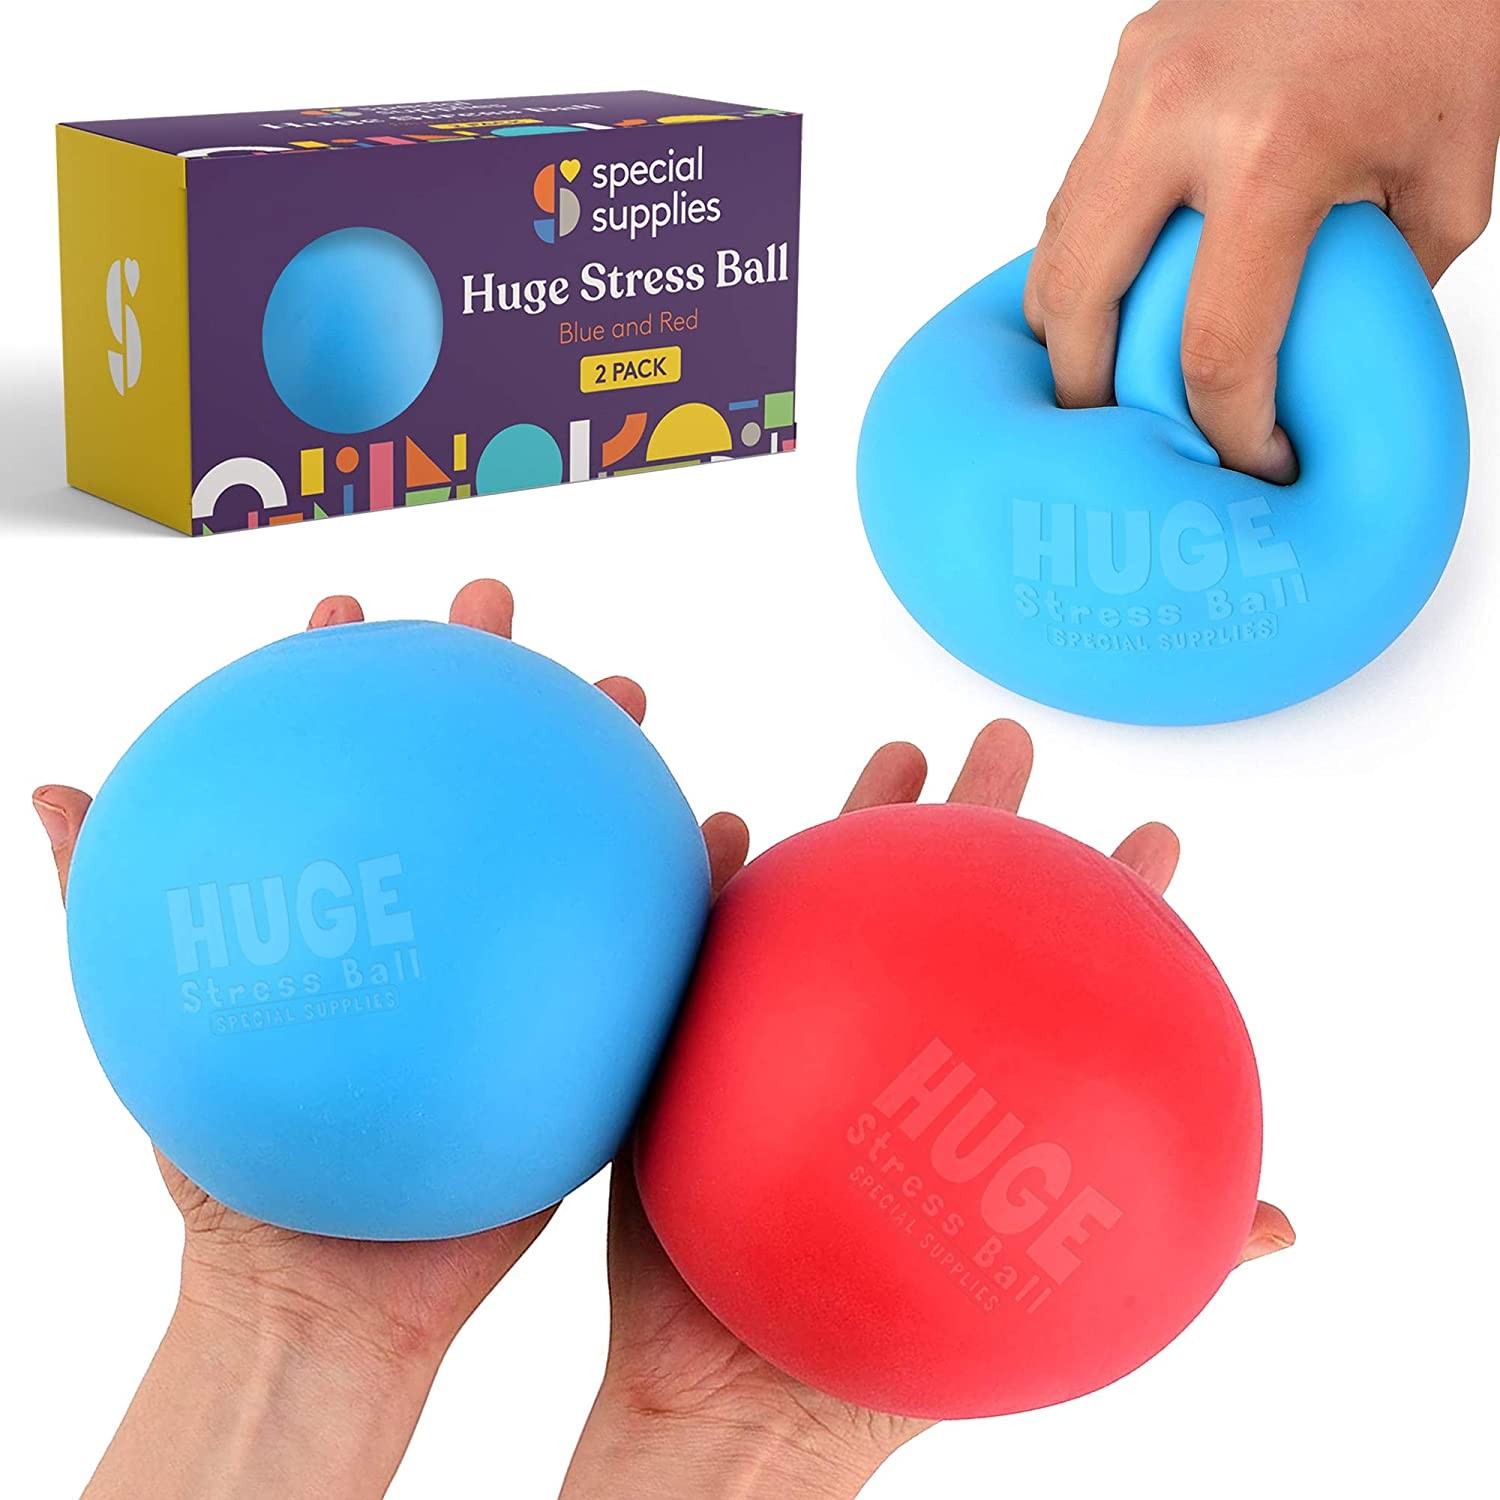 Jumbo Size Stress Balls for Kids and Adults - 2 Pack - Red and Blue